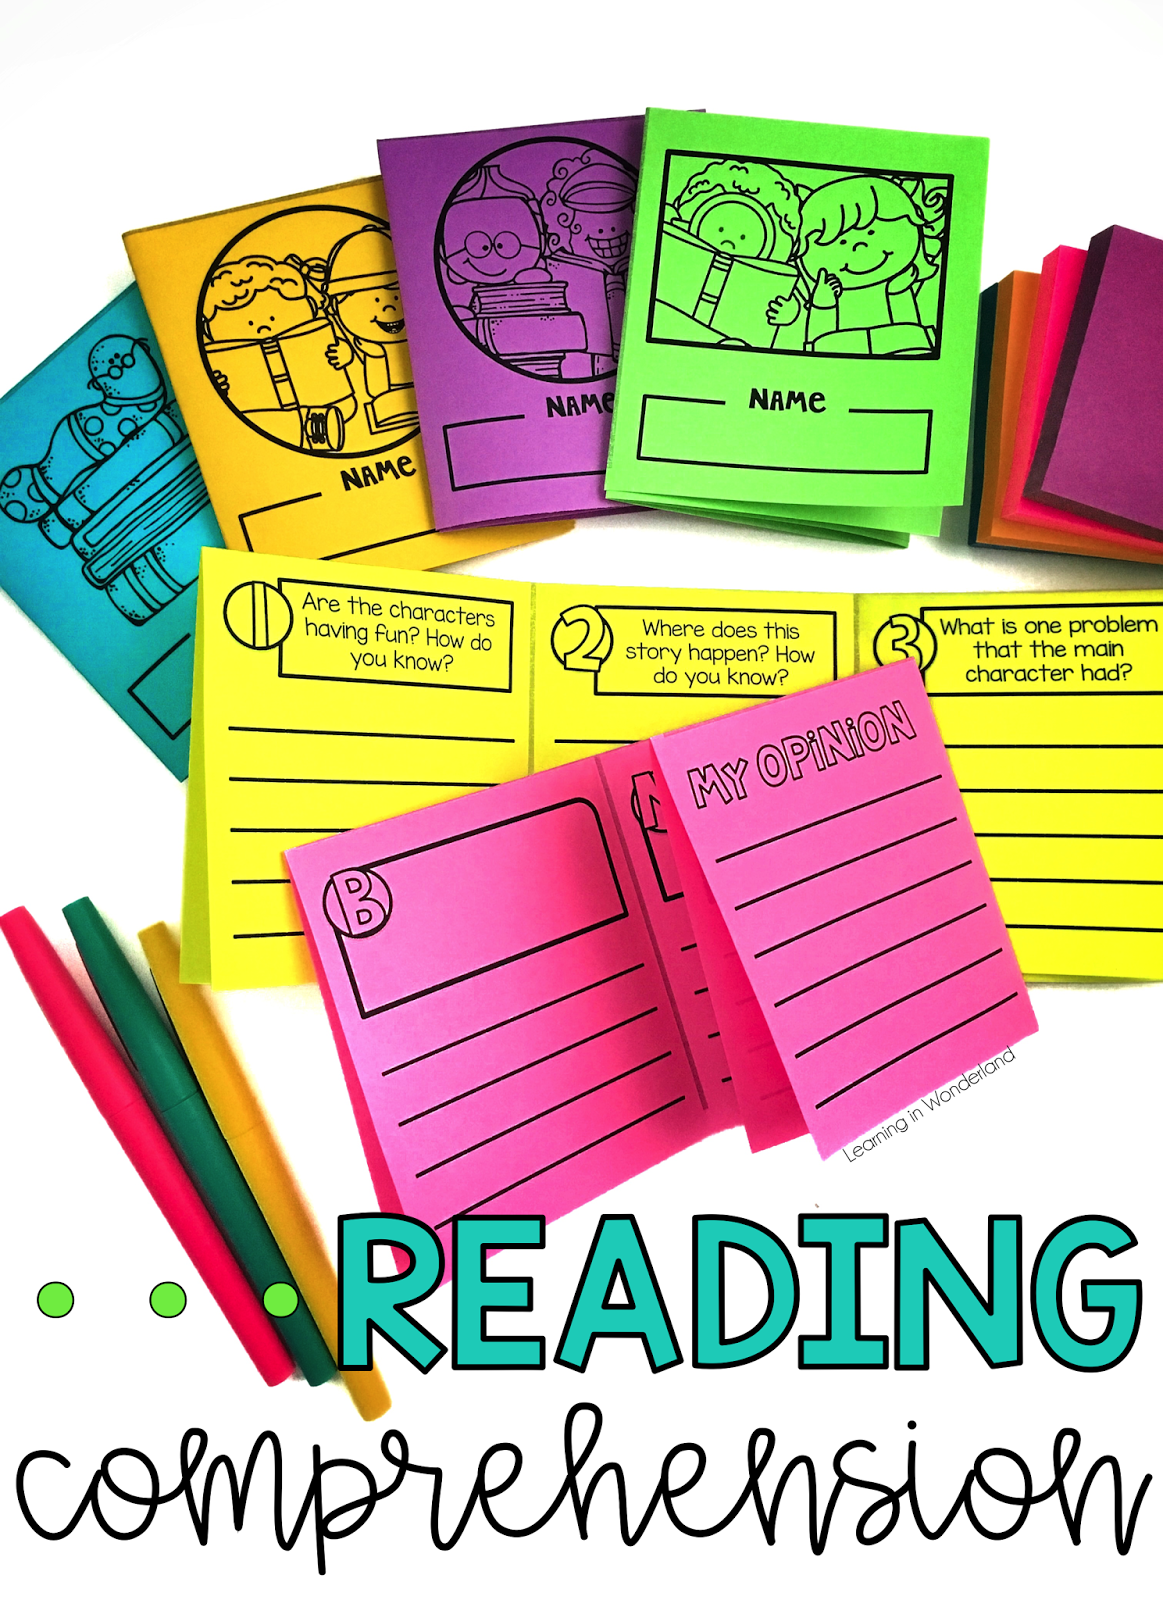 Reading comprehension foldables perfect for 1st and 2nd graders! They focus on story elements, characters, and many more skills! 